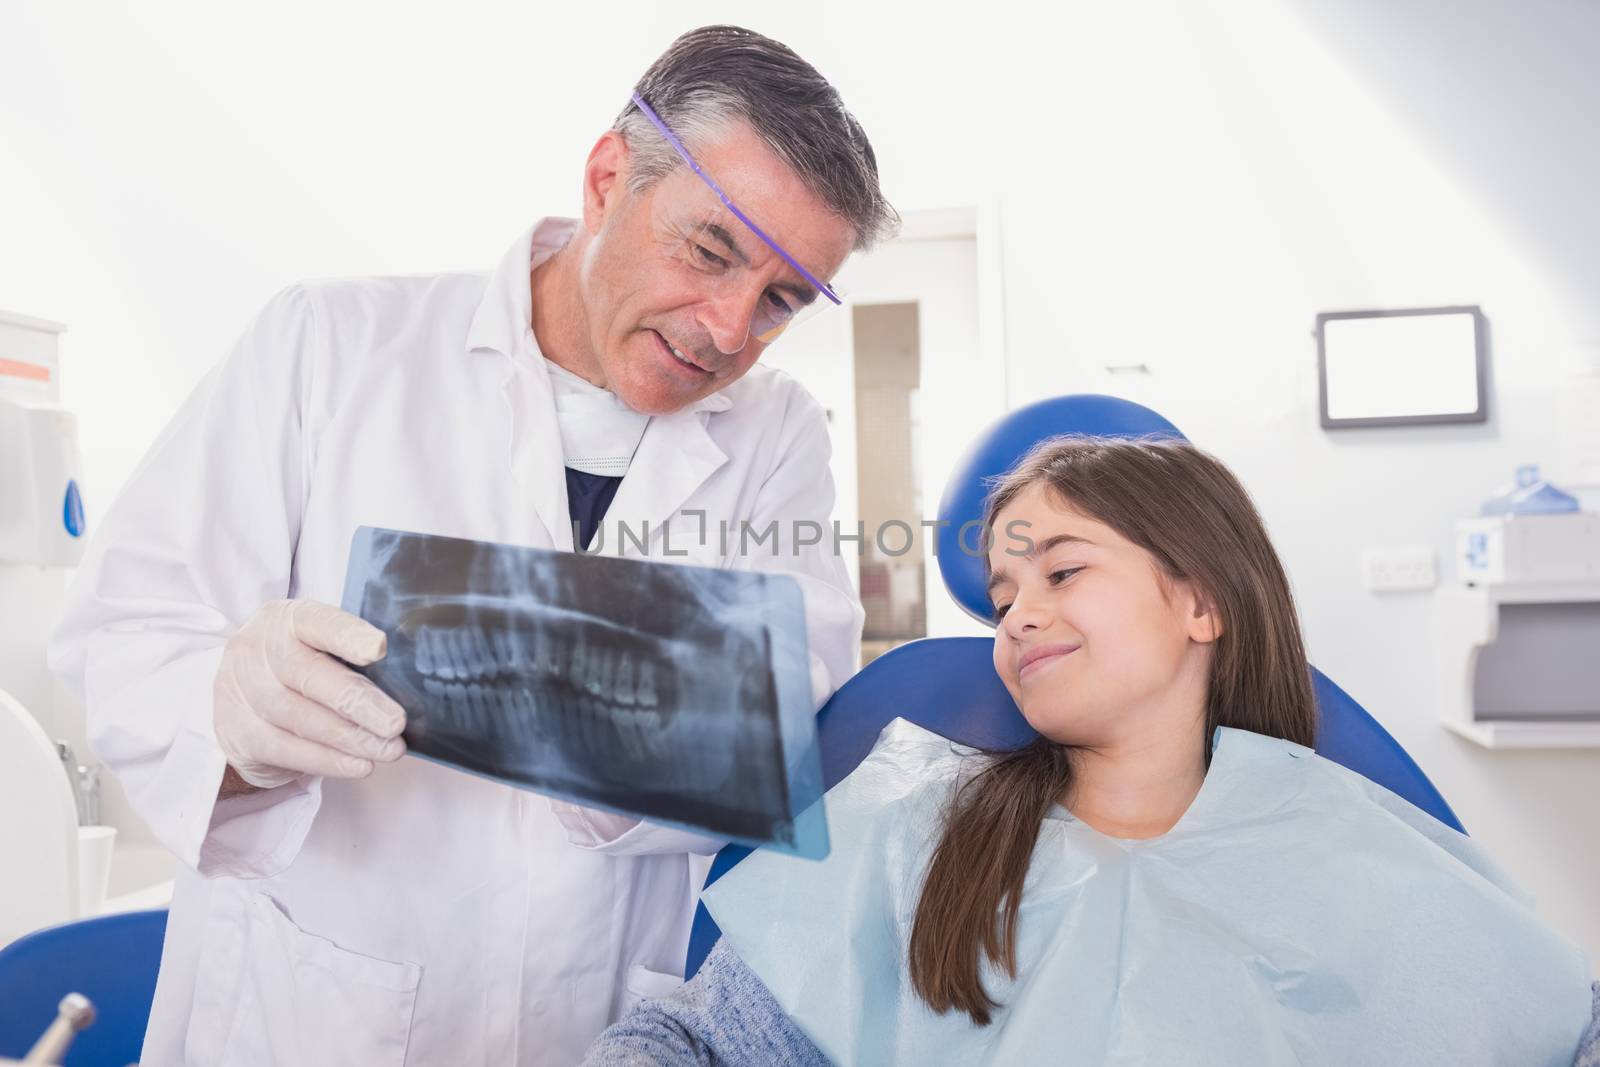 Pediatric dentist explaining to young patient the x-ray by Wavebreakmedia